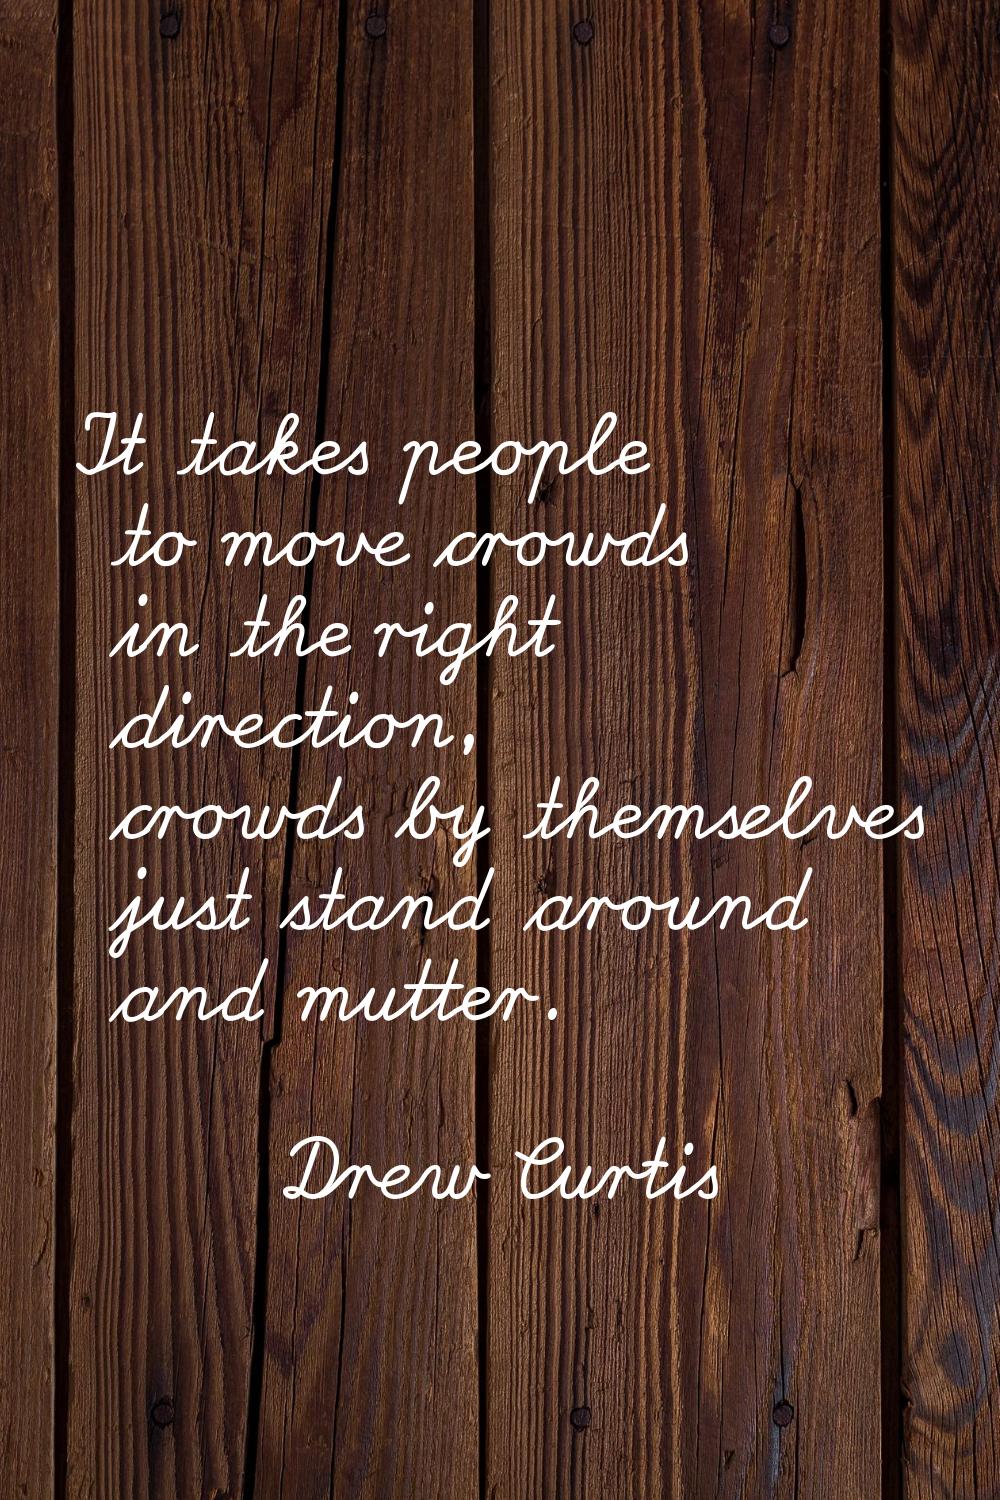 It takes people to move crowds in the right direction, crowds by themselves just stand around and m